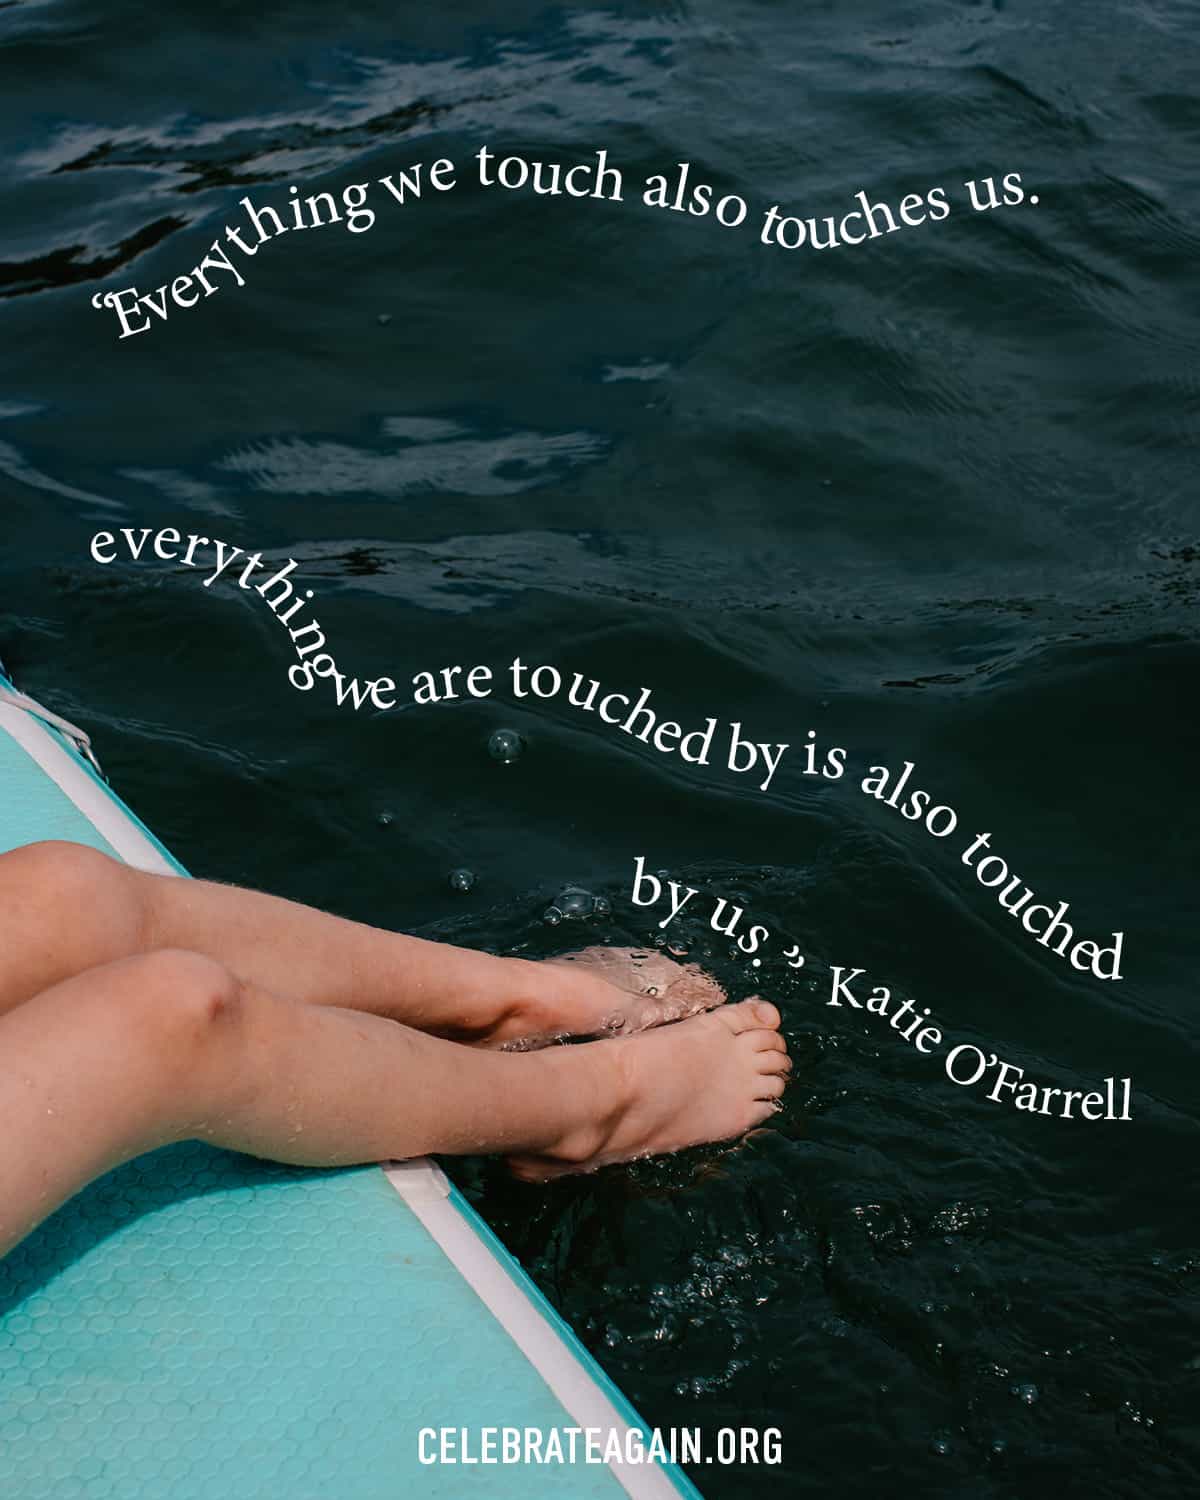 self love quotes for finding a purpose with text "“Everything we touch also touches us. everything we are touched by is also touched by us.” Katie O’Farrel over an image of toes in water